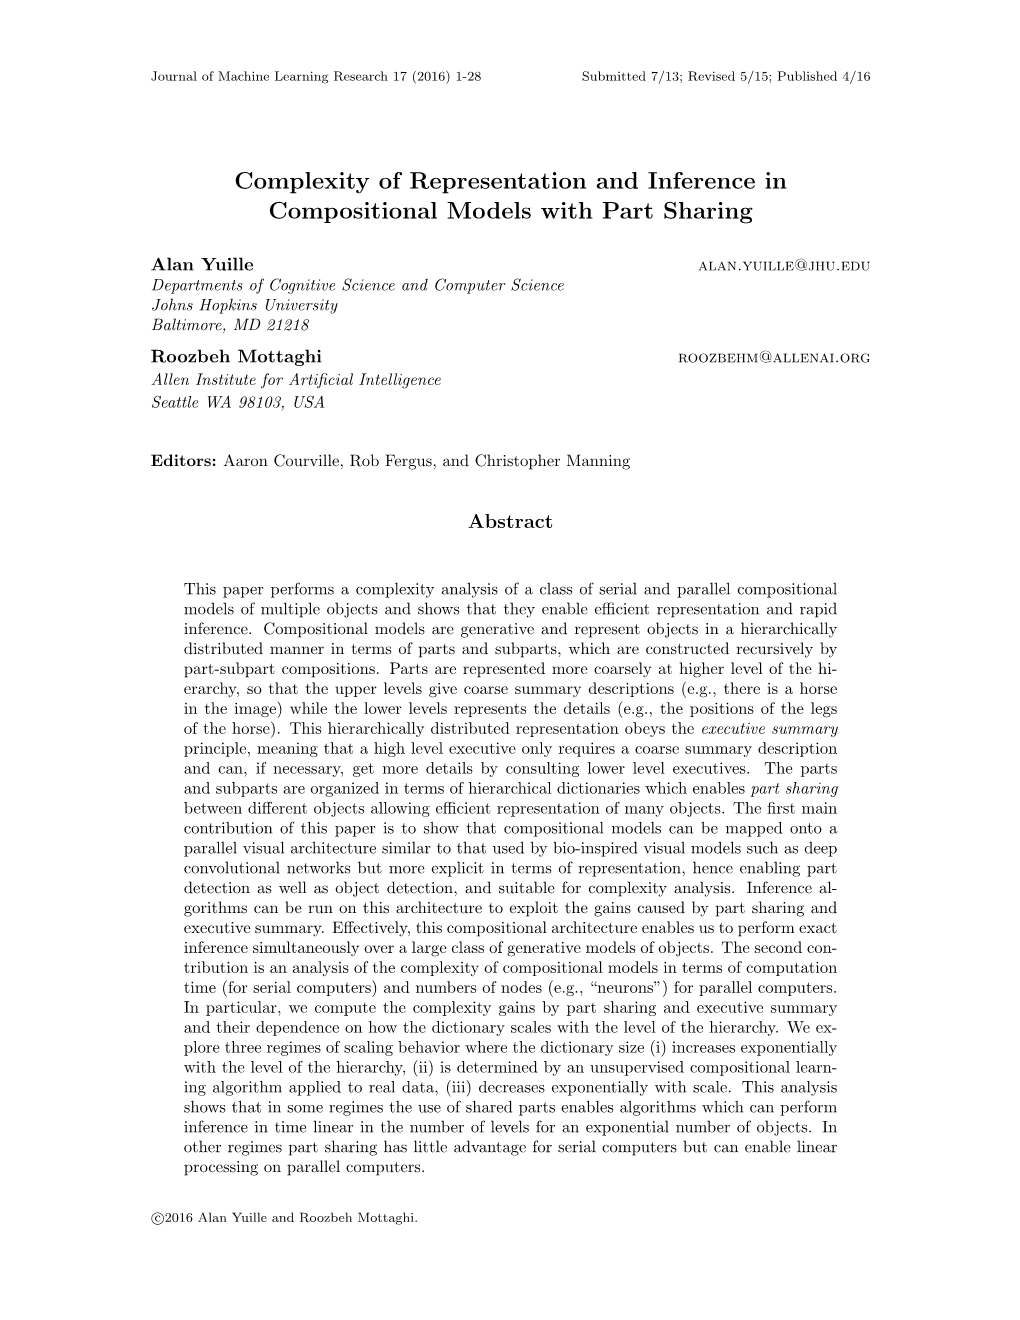 Complexity of Representation and Inference in Compositional Models with Part Sharing